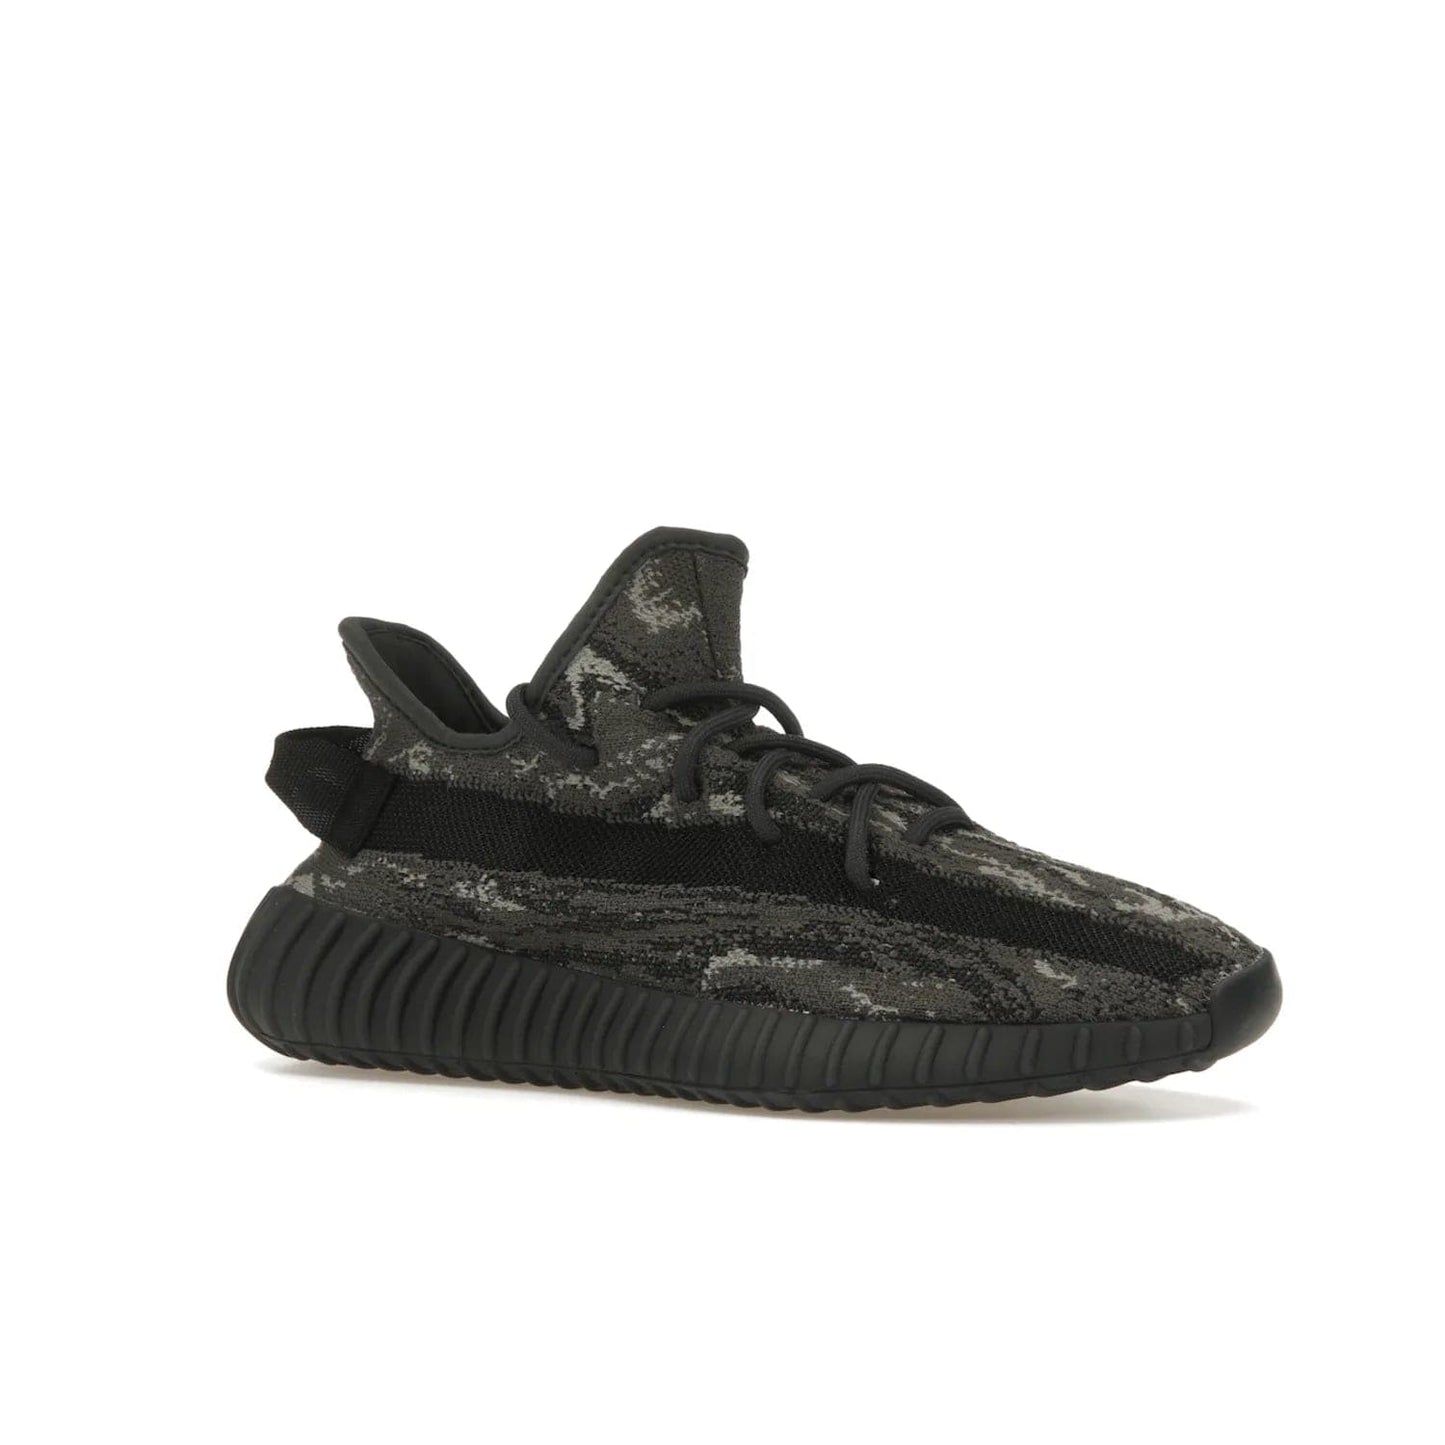 adidas Yeezy Boost 350 V2 MX Dark Salt - Image 4 - Only at www.BallersClubKickz.com - ##
The adidas Yeezy Boost 350 V2 MX Dark Salt offers a contemporary look with a signature combination of grey and black hues. Cushioned Boost midsole and side stripe allow for all day wear. Get the perfect fashion-forward addition with this sleek sneaker for $230.